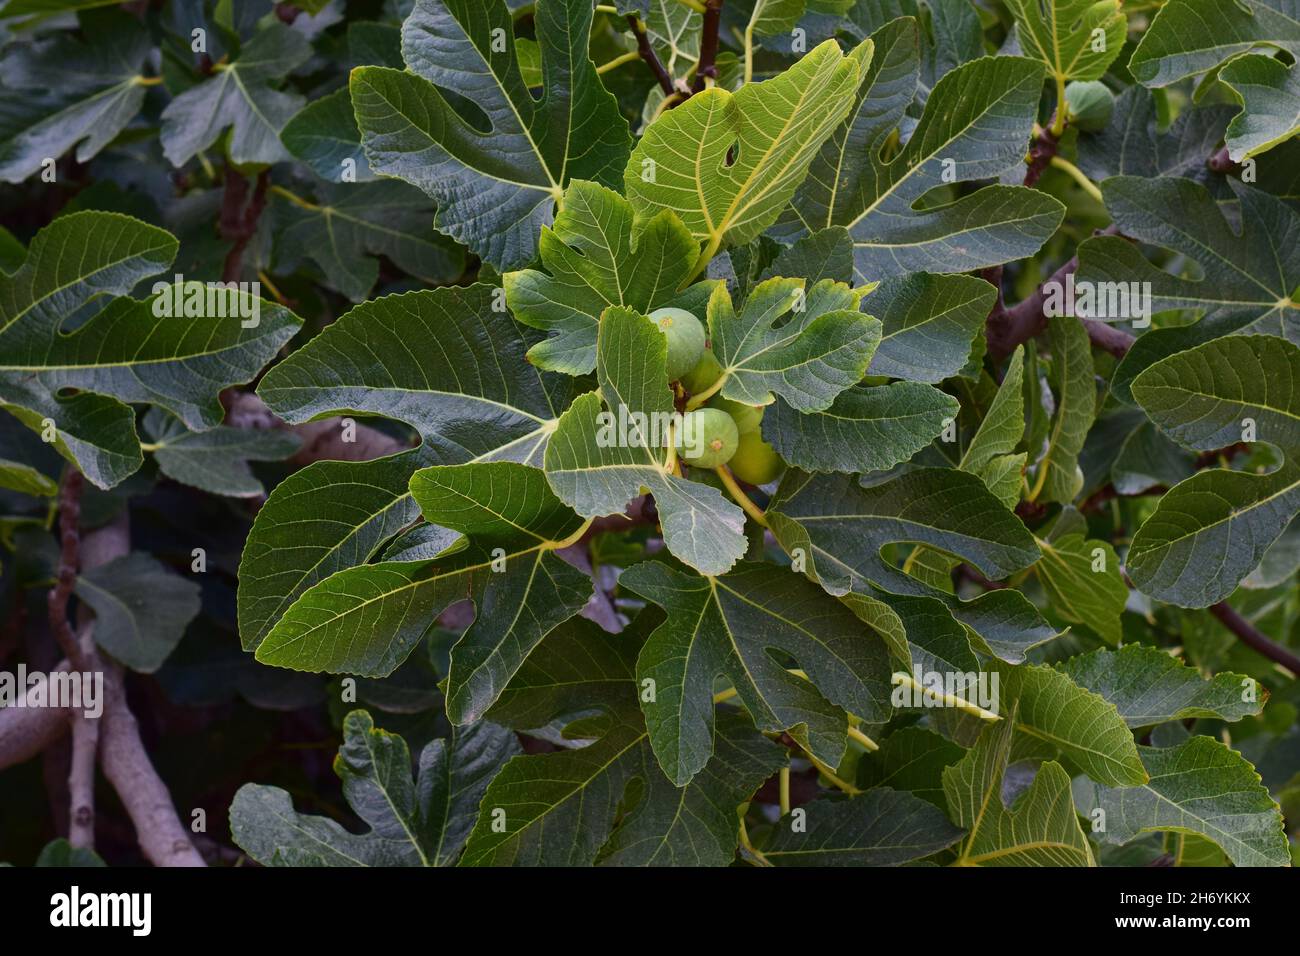 Unripe green figs growing on the tree Stock Photo